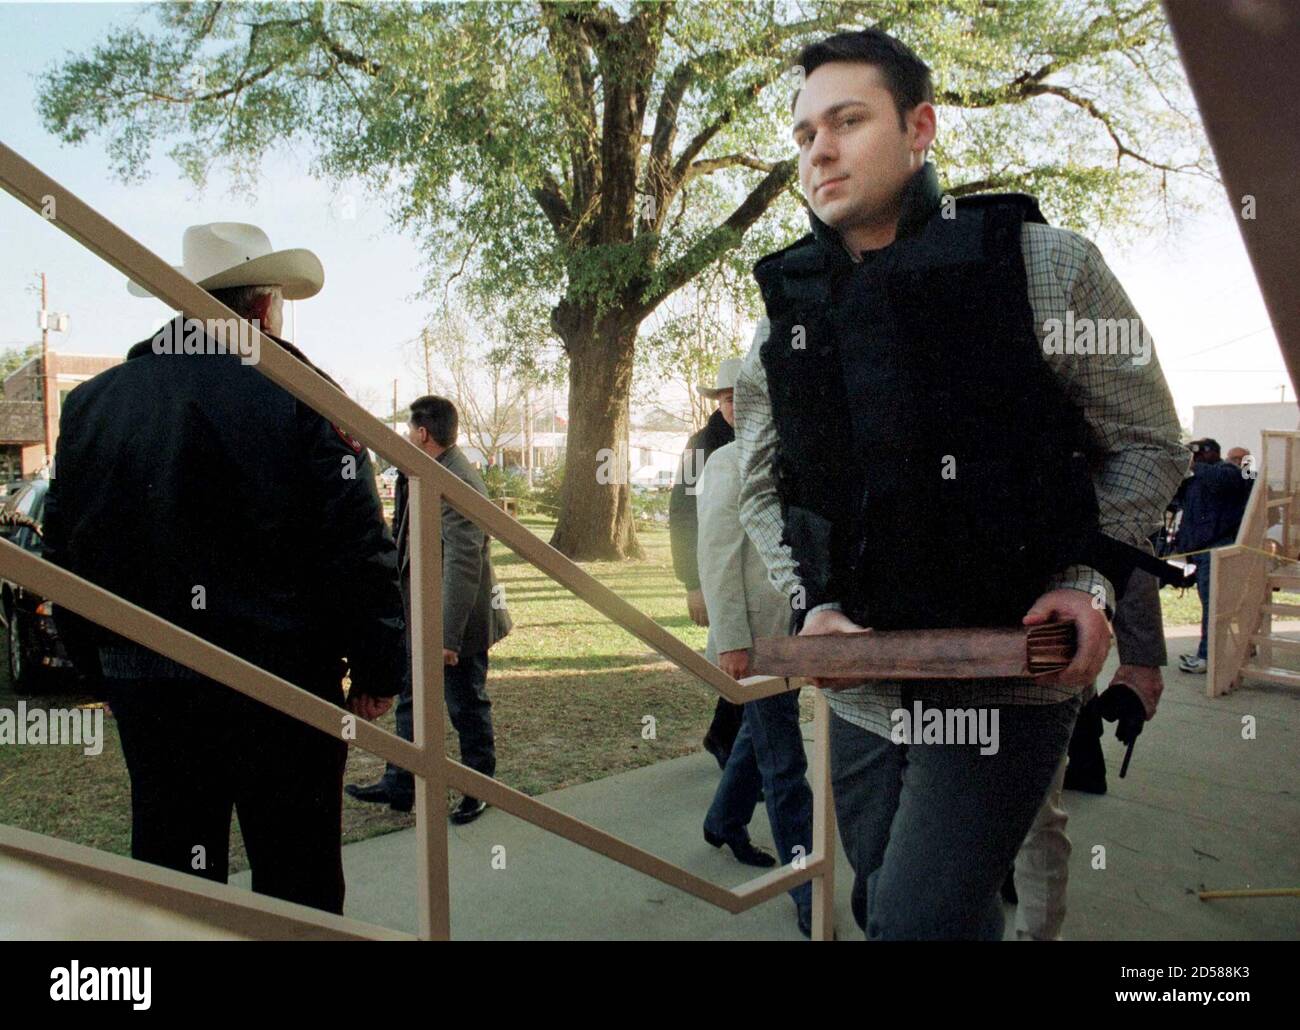 John William 'Bill' King, 24, accused in the dragging death of James Byrd Jr., arrives at the Jasper County Courthouse, February 19. Byrd, 49, was dragged to his death eight months ago in Jasper, Texas. aal/ Photo by Adrees A.  AAL/JP/CLH/ Stock Photo